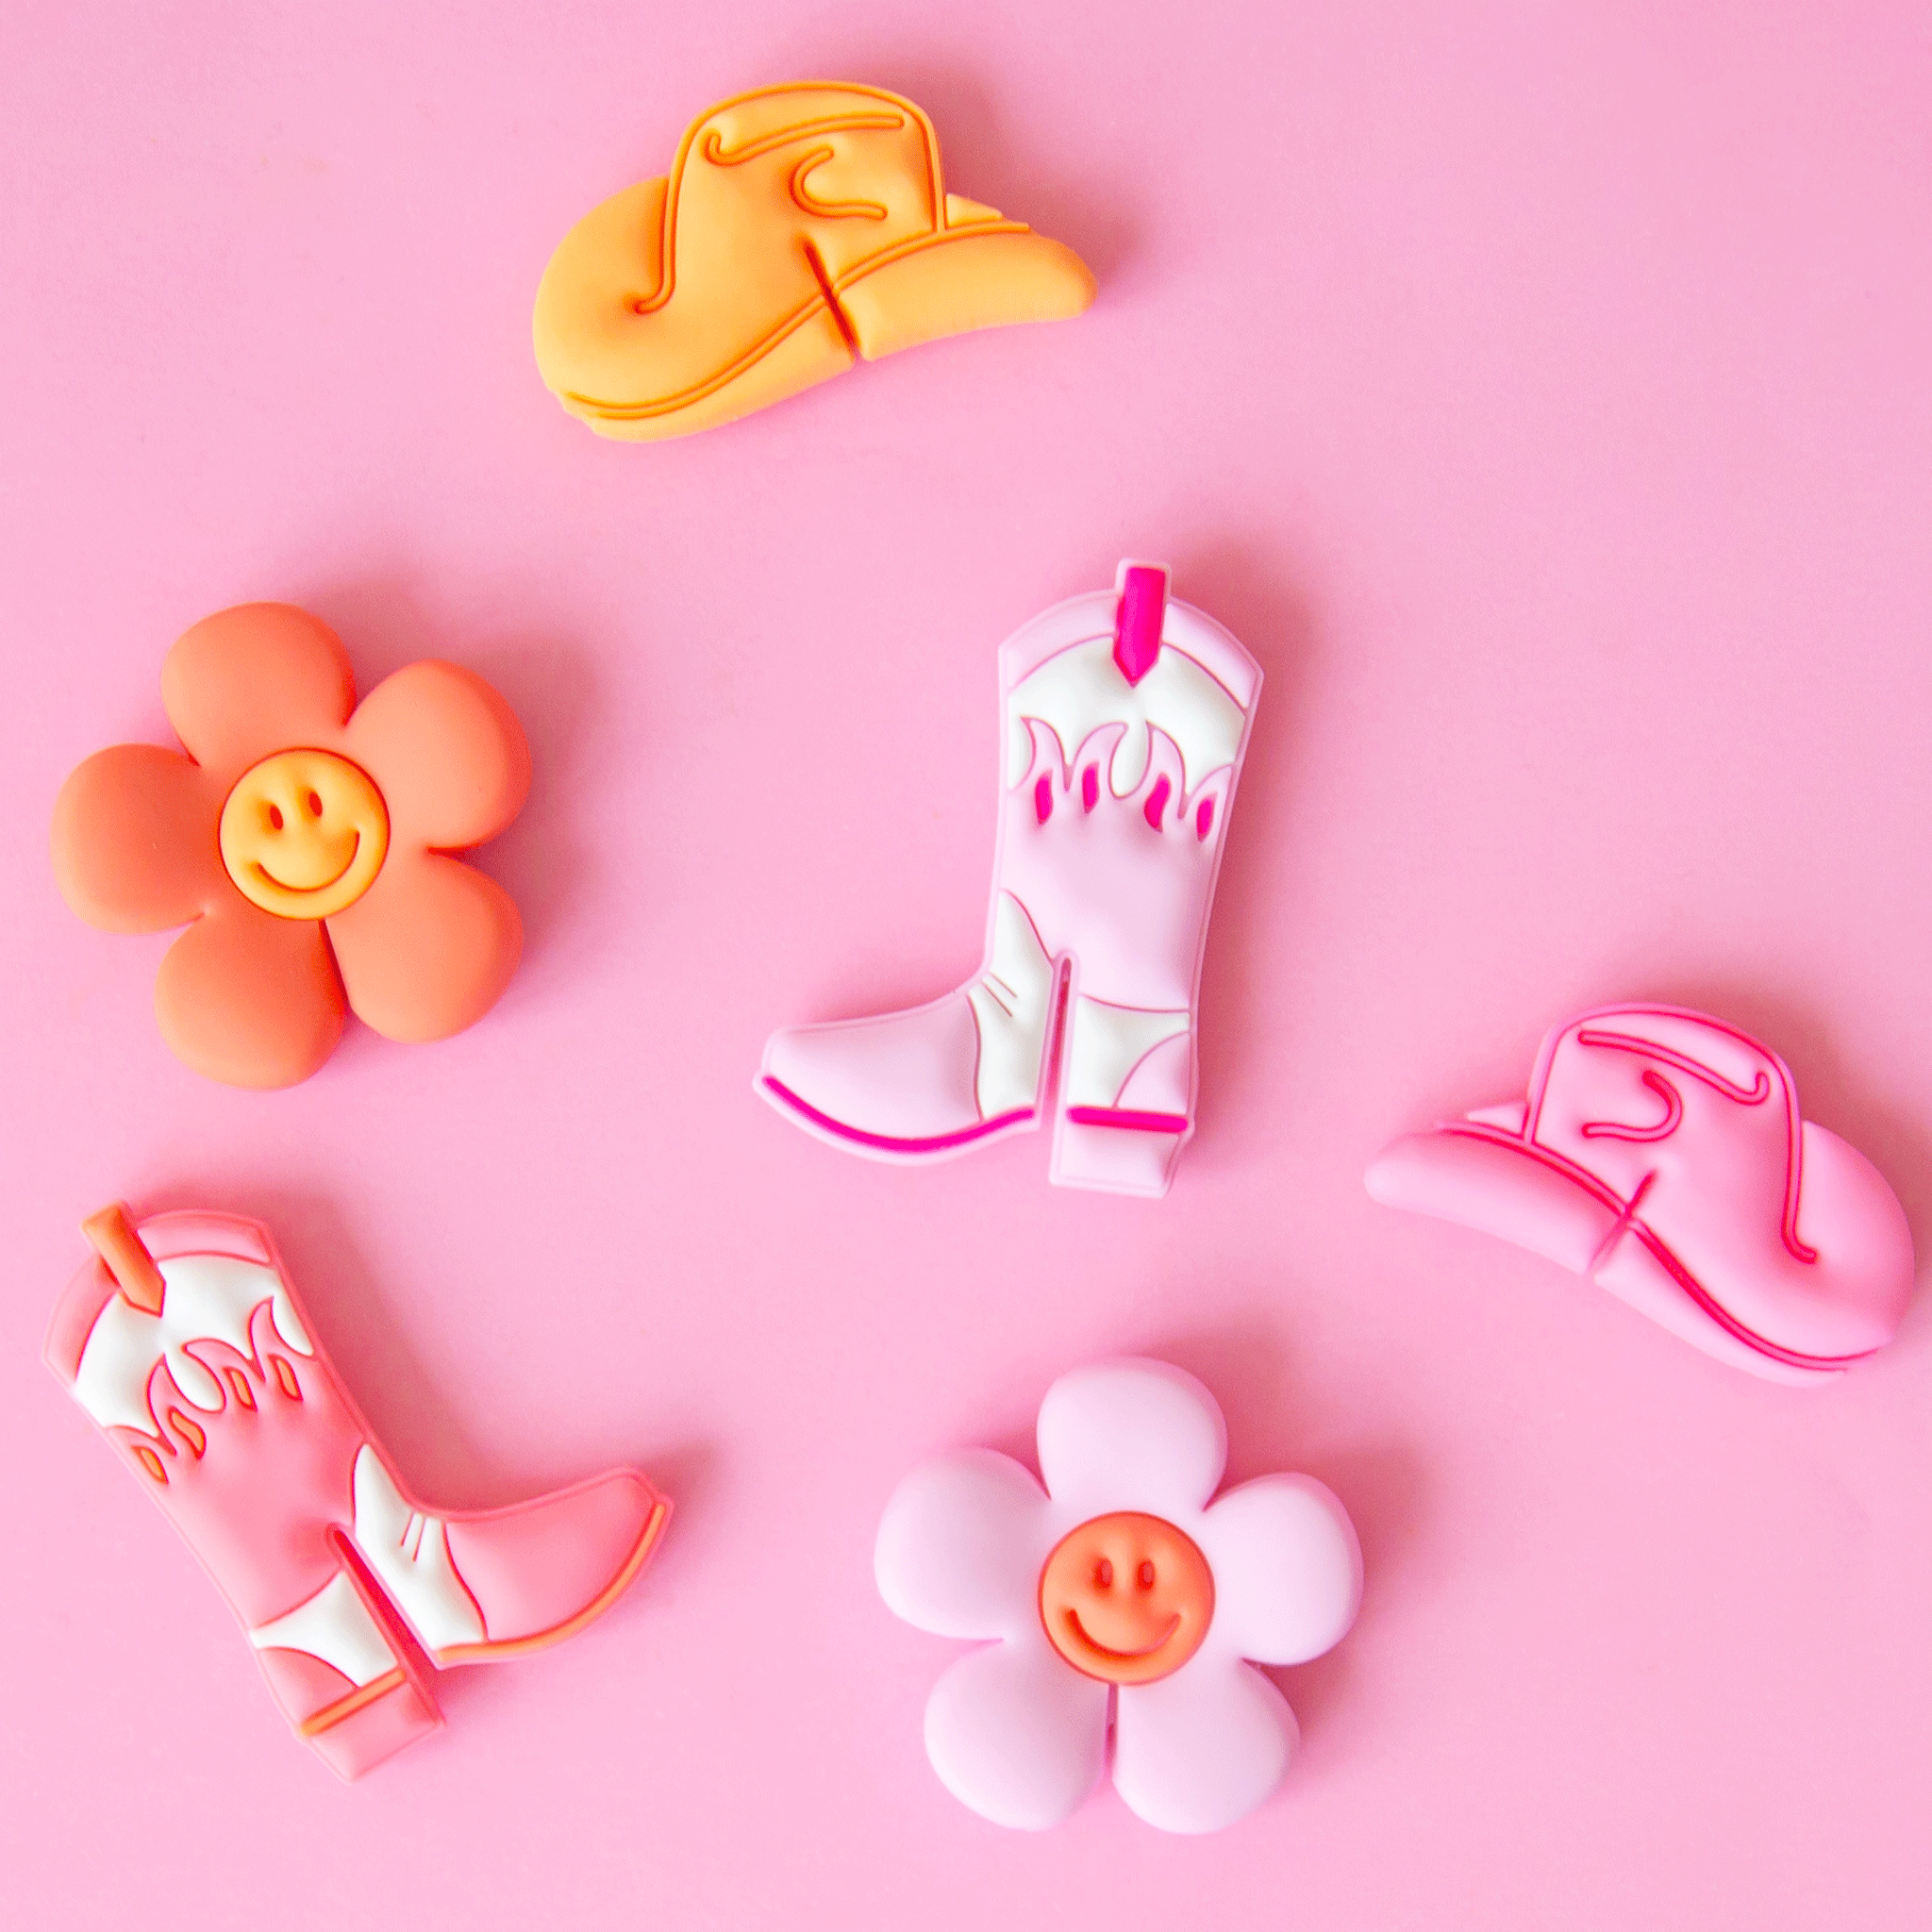 On a pink background is a set of 6 drink markers in western themed shapes including cowgirl boots, hats and smiley face daisies.